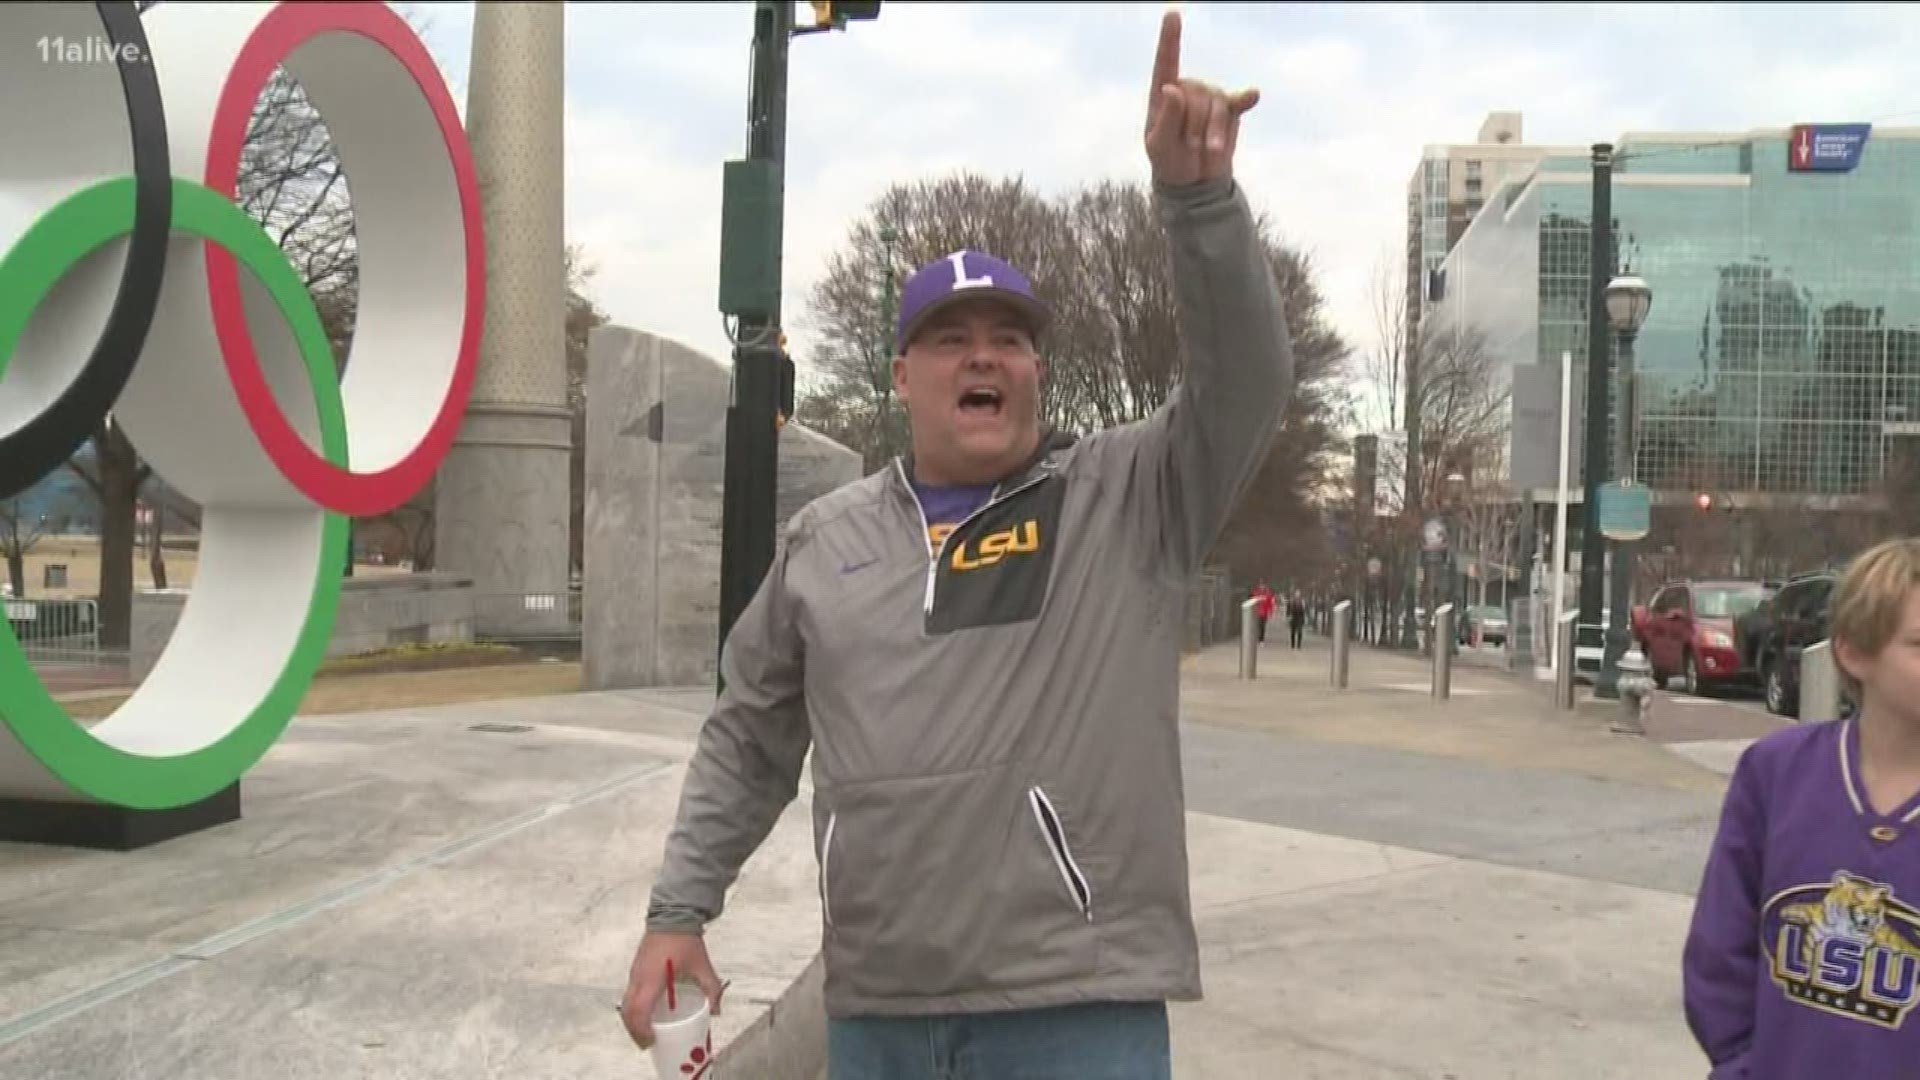 The match pitted Georgia vs. LSU. We spoke to fans on both sides of the heated rivalry.